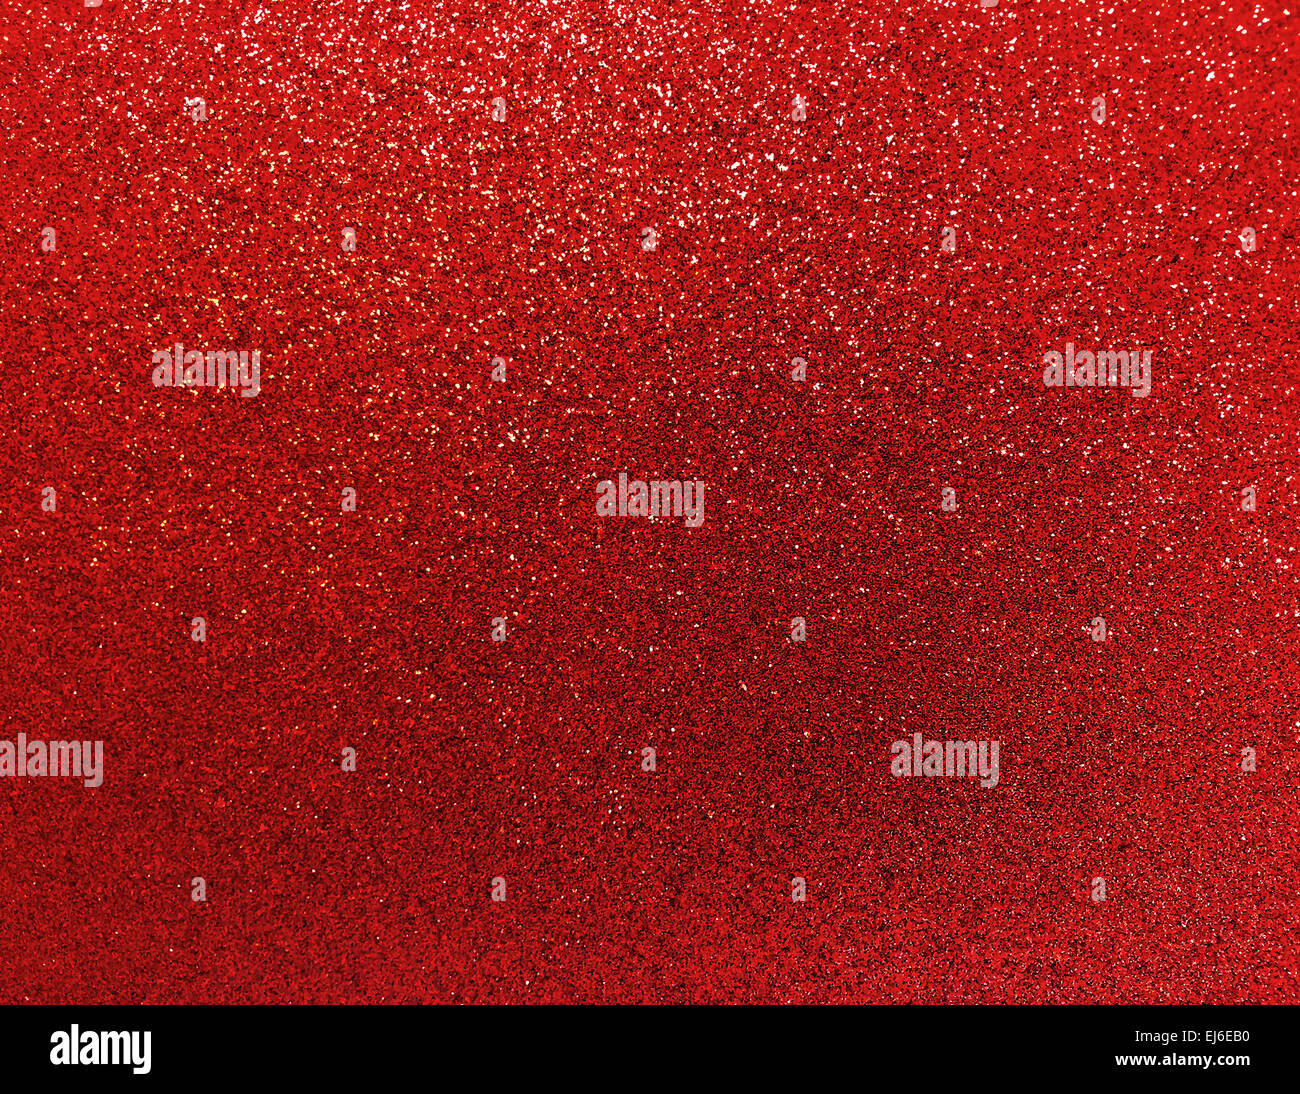 Red Glitter Paper Background Texture Sparkle Shiny Gilttery Stock Photo